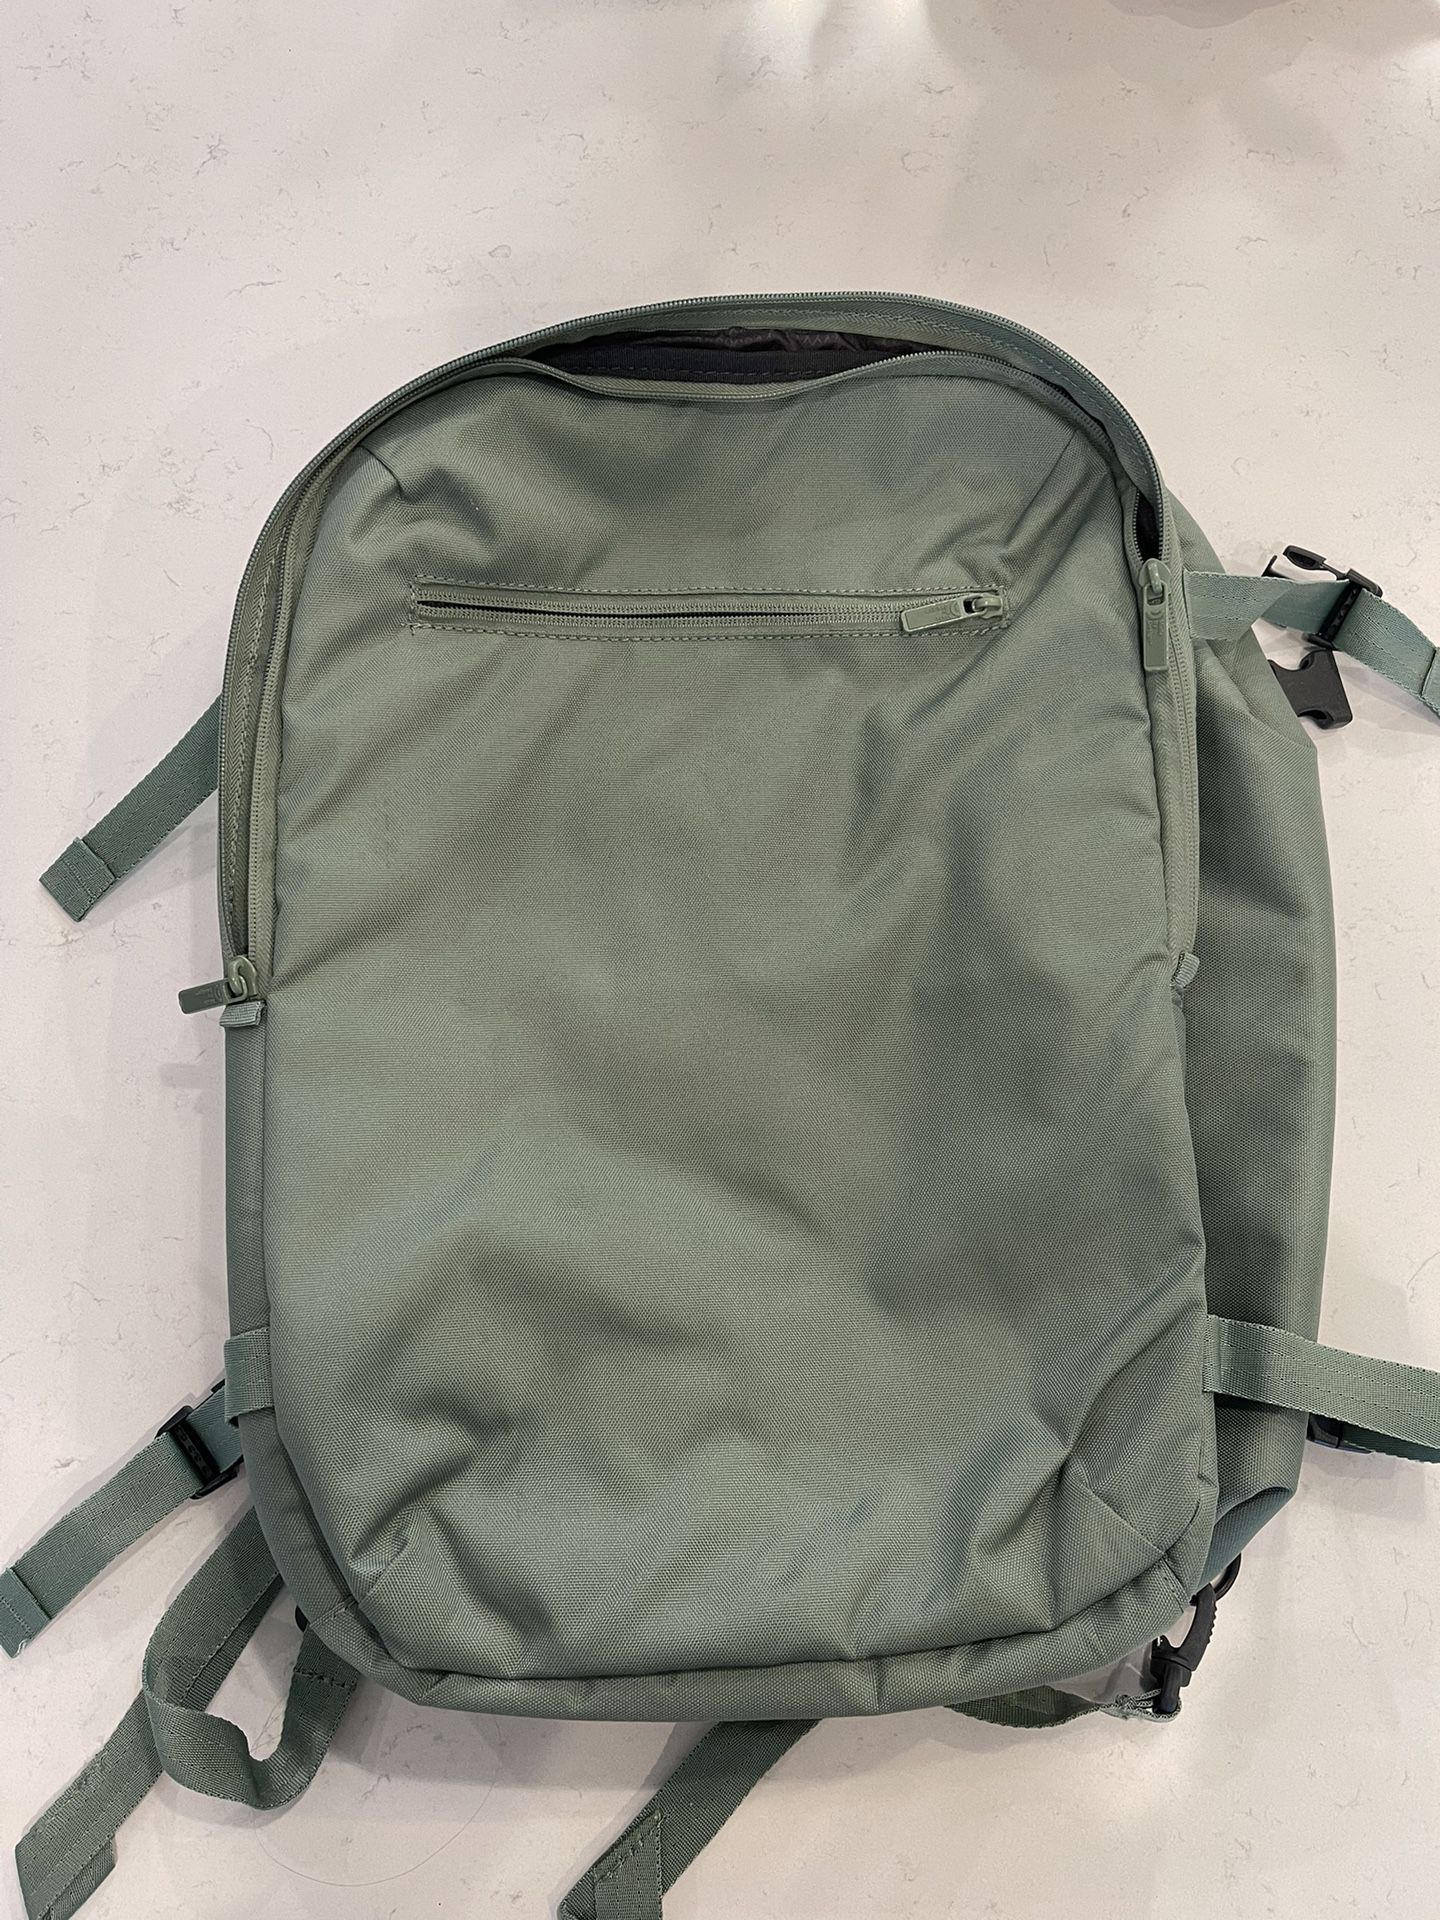 Large Backpack - Traveling Or Hiking 